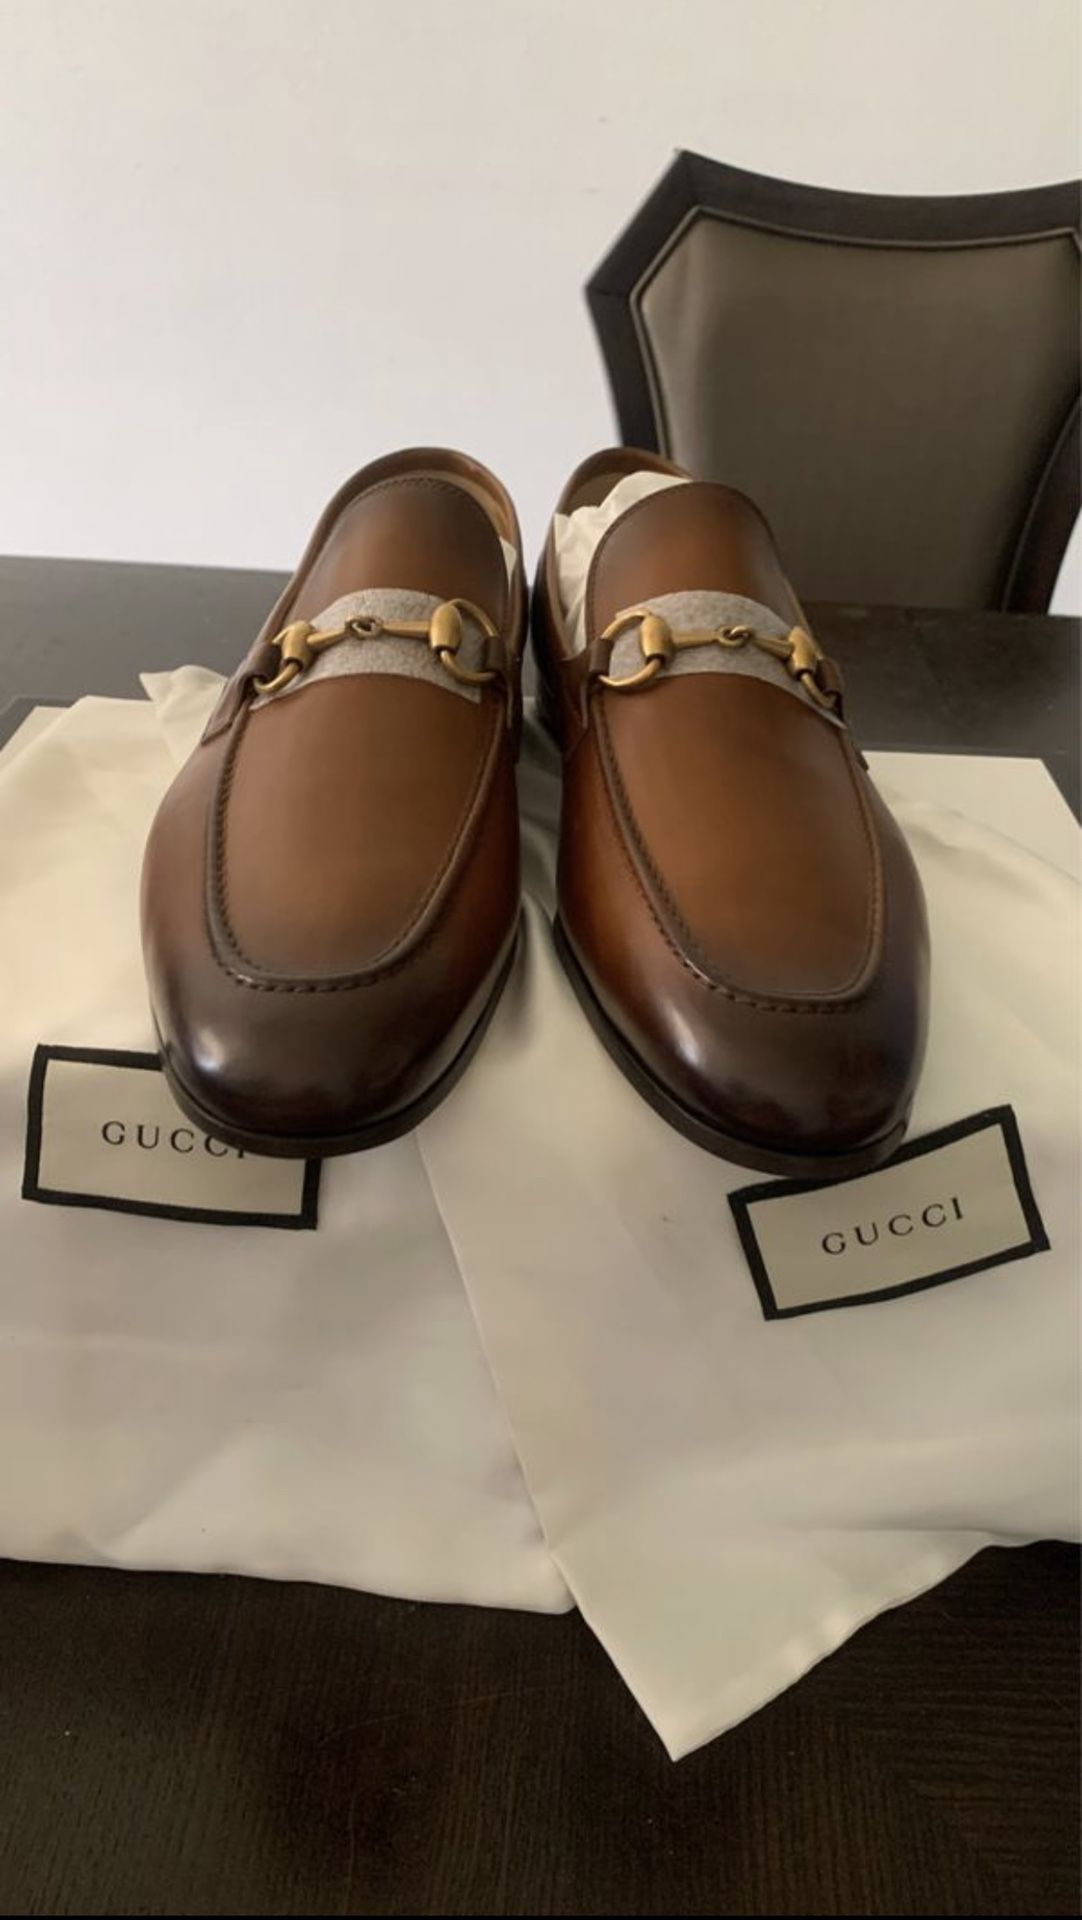 Men’s 8.5 never been used Gucci shoes